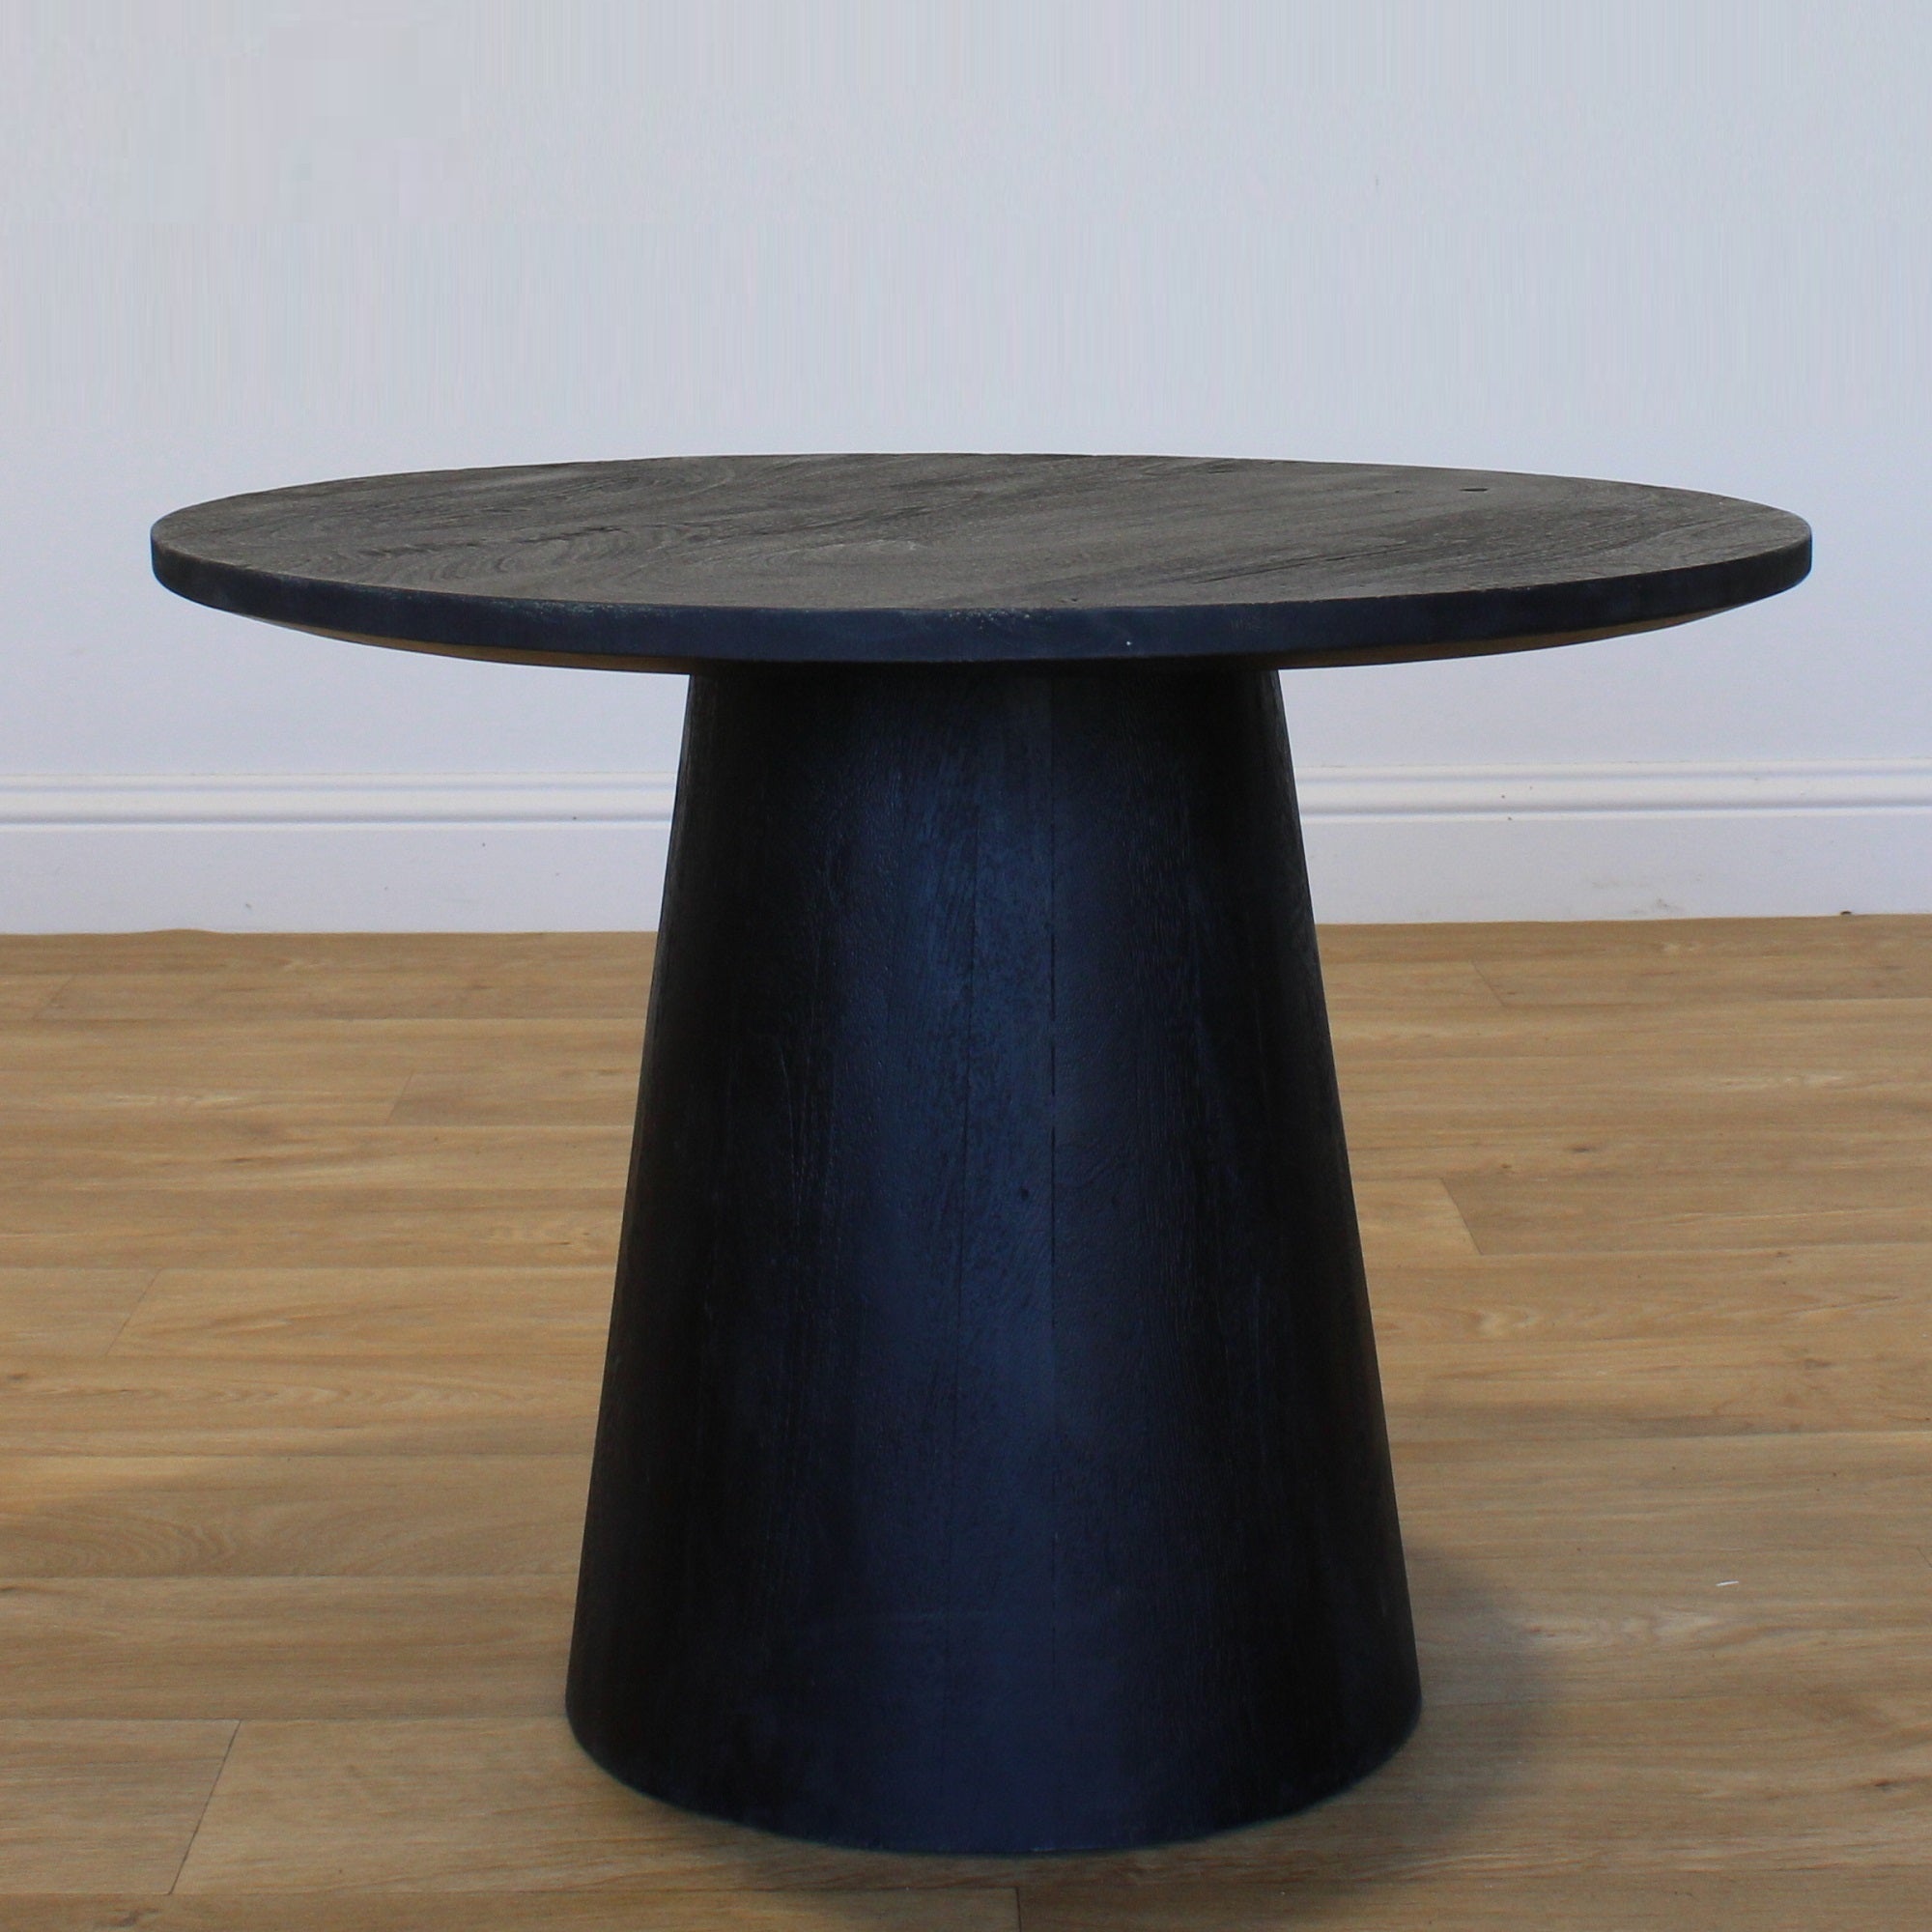 Gil Black Wooden Coffee Table